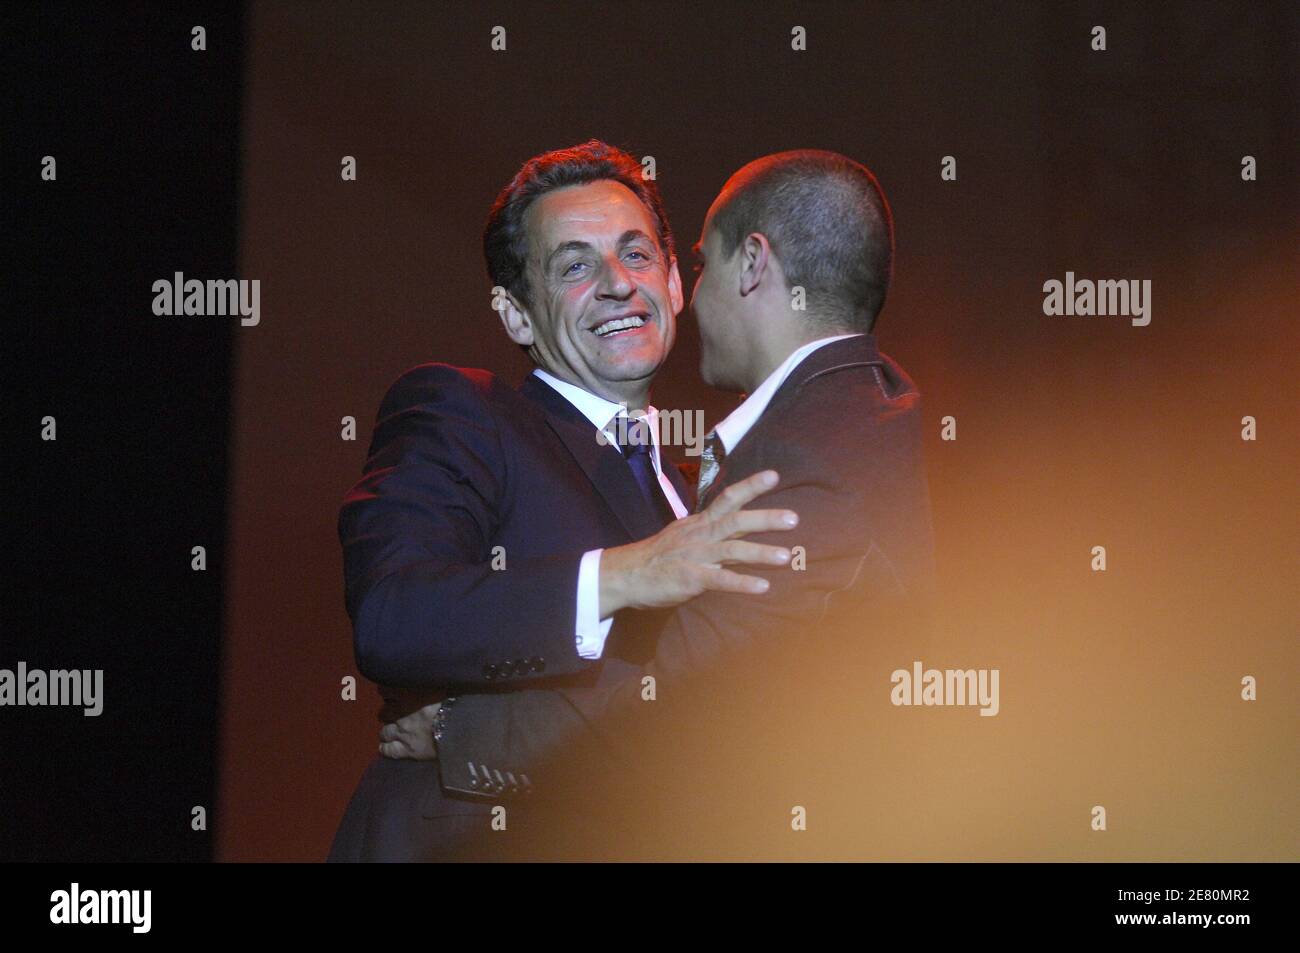 France's newly-elected president Nicolas Sarkozy is congratuled by singer Faudel as he addresses his supporters, Place de la Concorde in Paris, France, May 6, 2007. French voters elected reform-minded Nicolas Sarkozy as their new president on Sunday, giving him a comfortable winning margin, preliminary official results and projections from four polling agencies showed. With more than half of the vote counted, Sarkozy was scoring just over 53 percent to a little more than 46 percent for Socialist Segolene Royal. Polling agencies also had the conservative Sarkozy winning 53 percent of the vote c Stock Photo